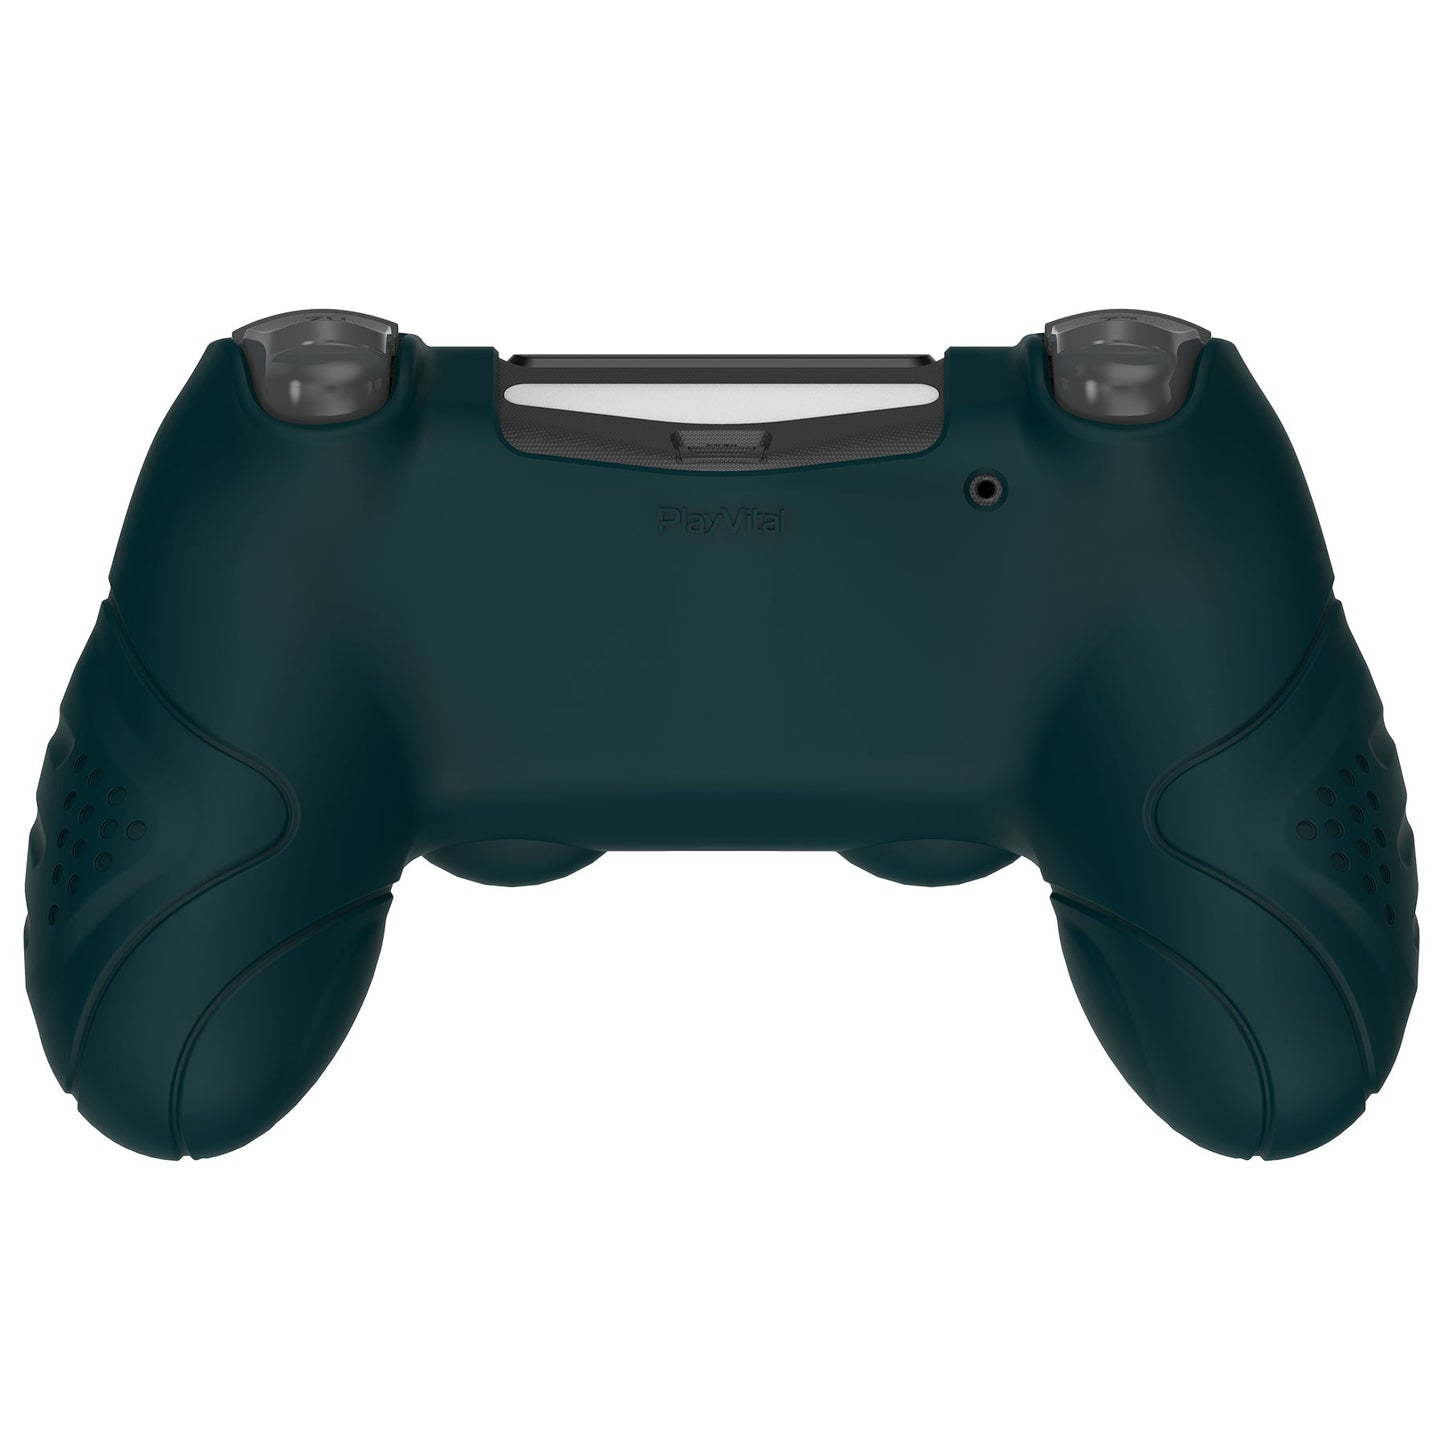 PlayVital Guardian Edition Racing Green Ergonomic Soft Anti-Slip Controller Silicone Case Cover for ps4, Rubber Protector Skins with black Joystick Caps for PS4 Slim PS4 Pro Controller - P4CC0062 playvital